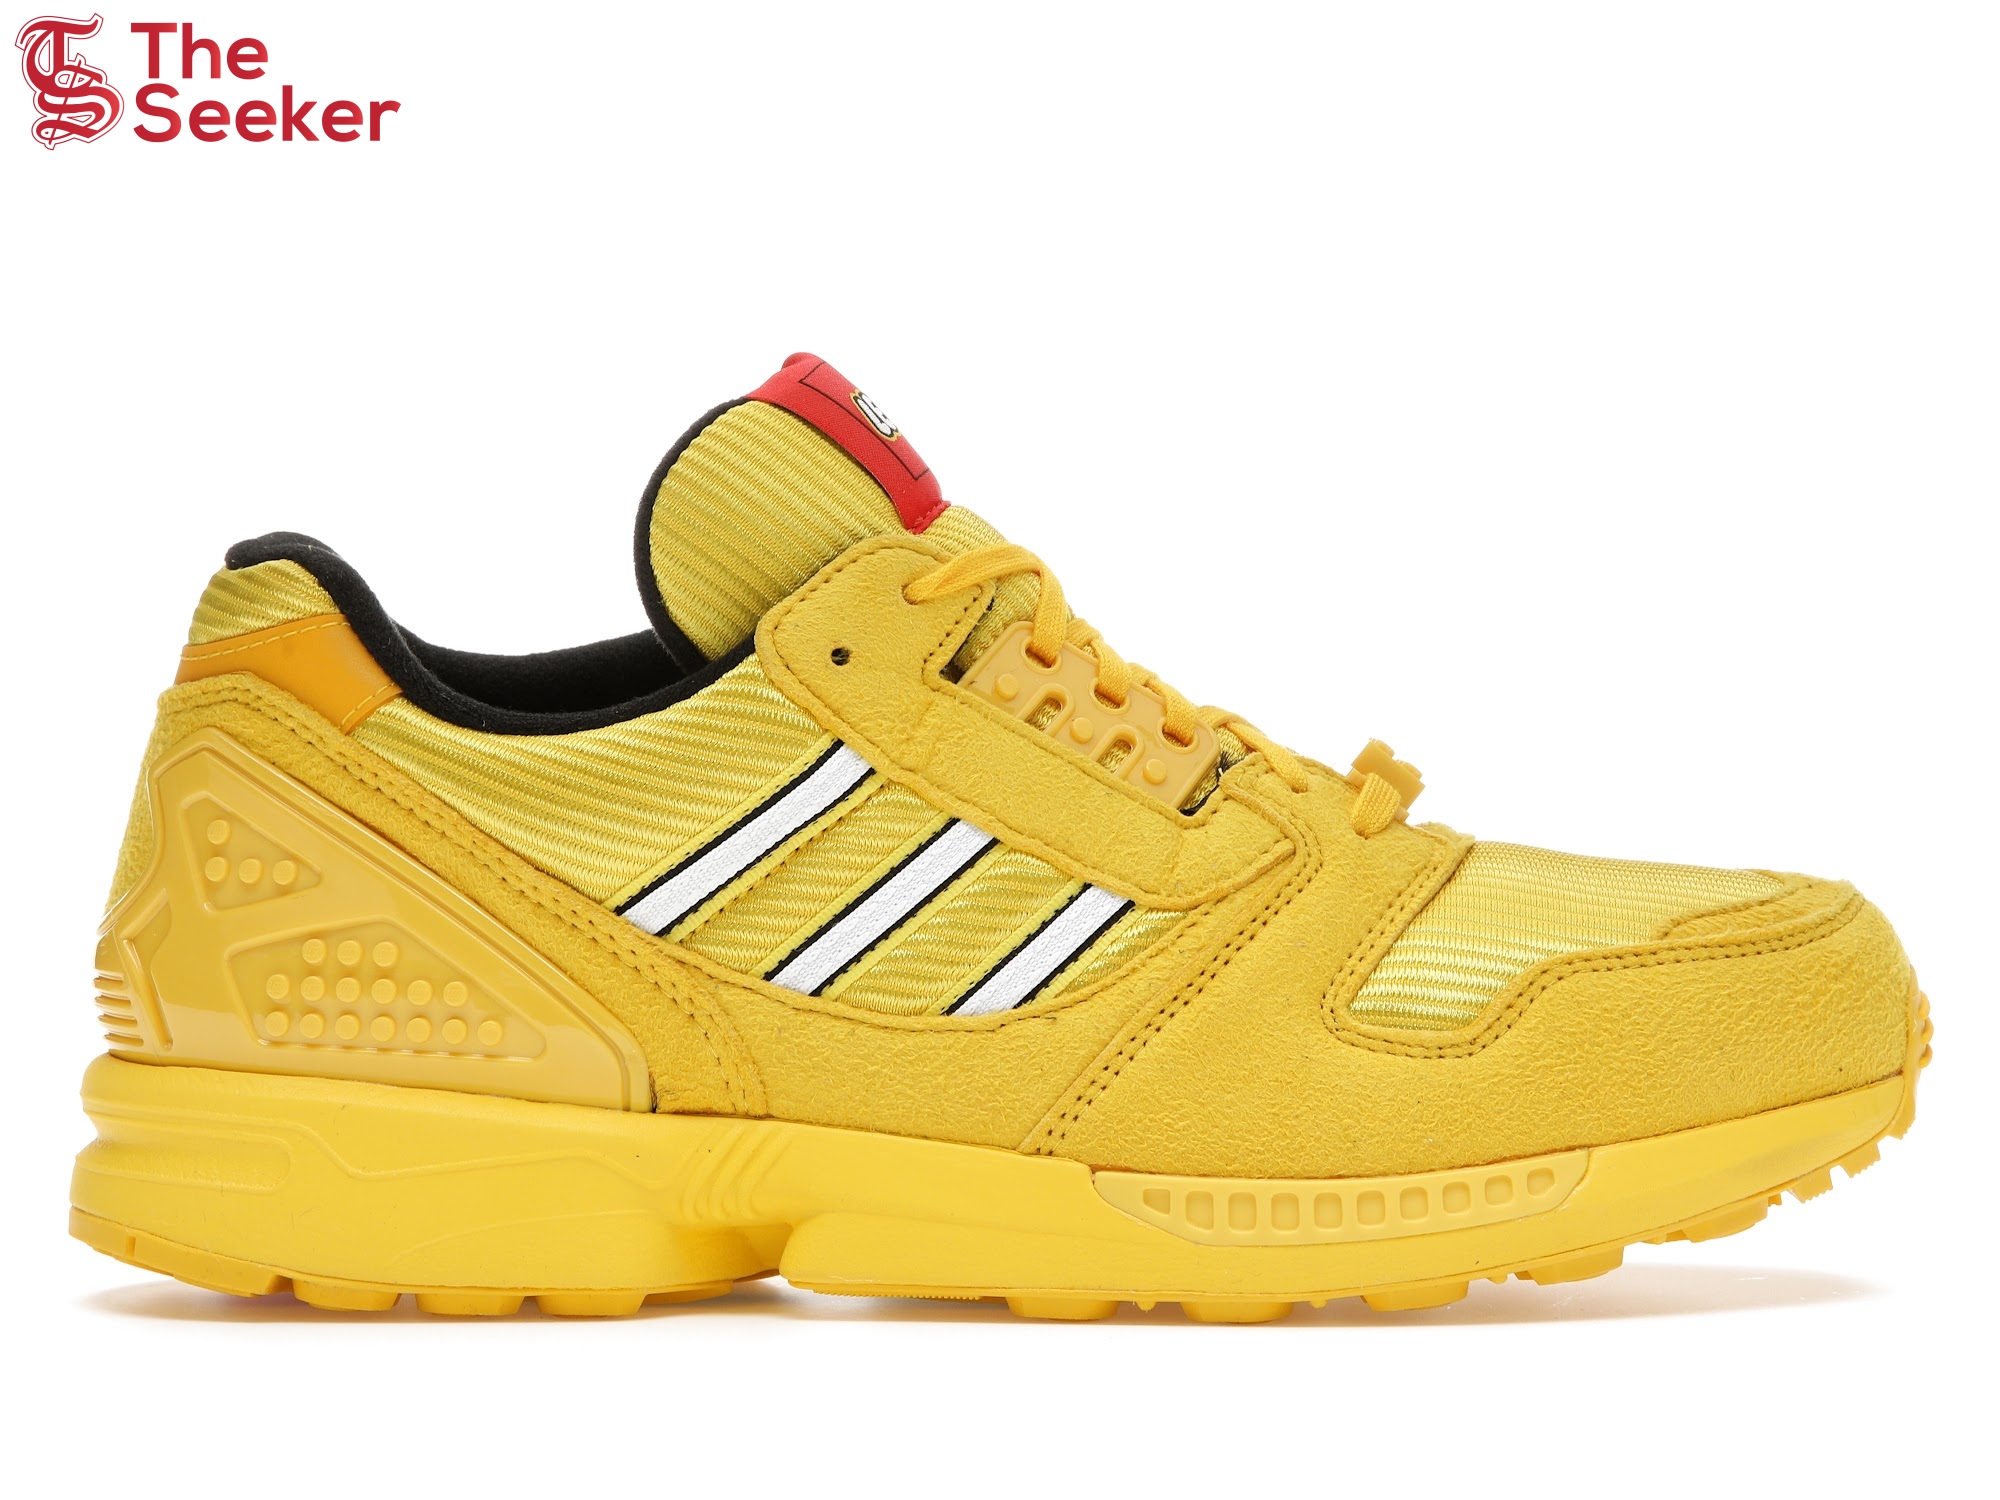 adidas ZX 8000 LEGO Color Pack Yellow